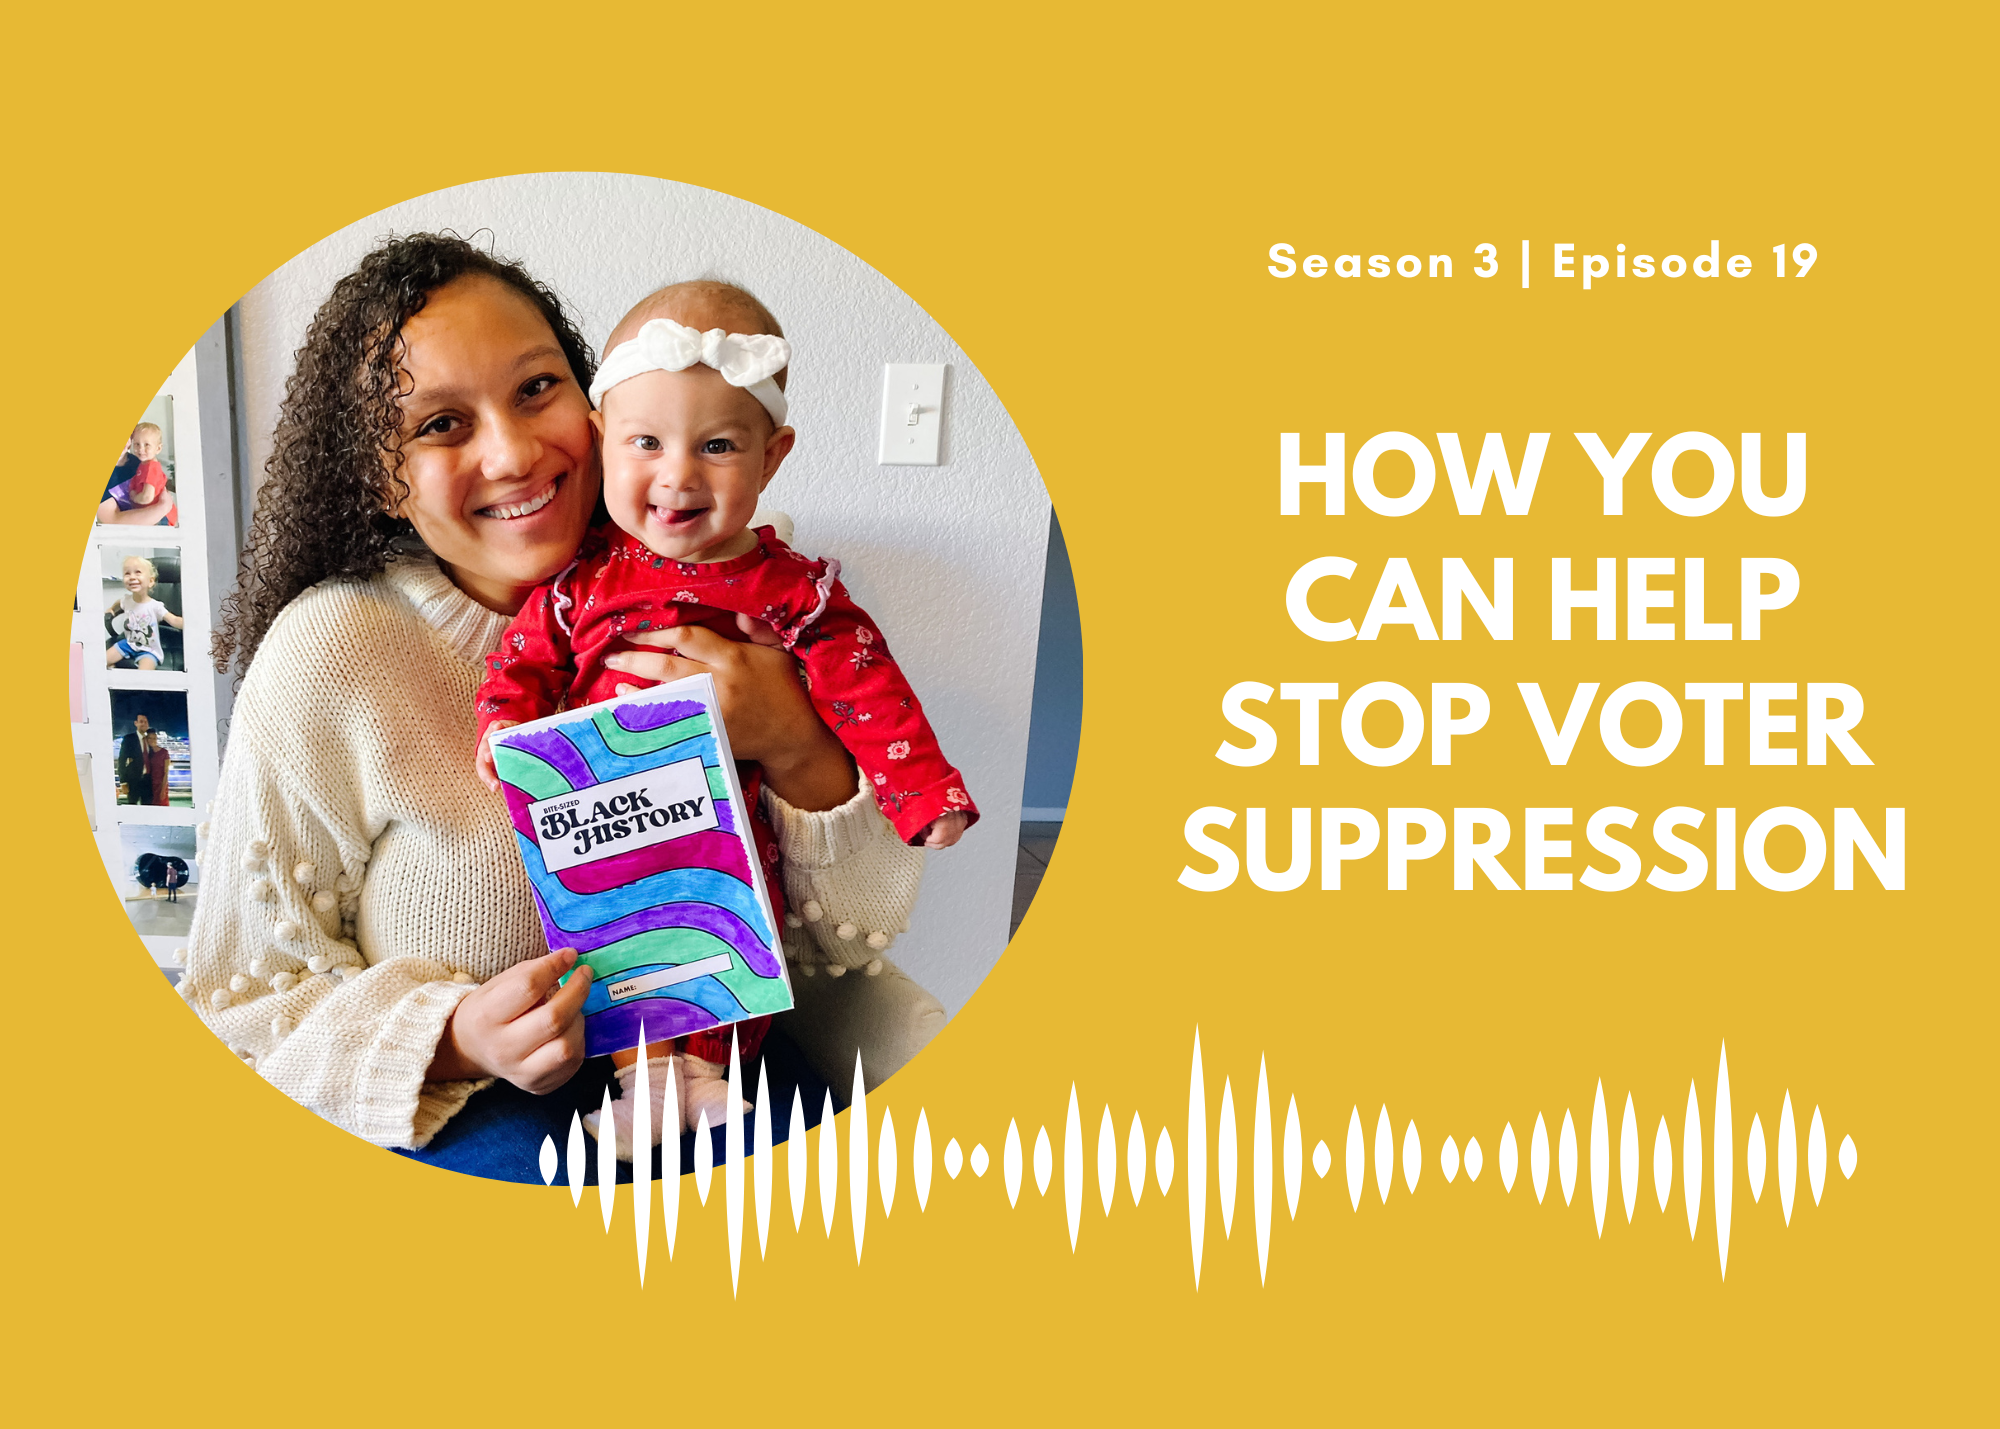 How You Can Help Stop Voter Suppression